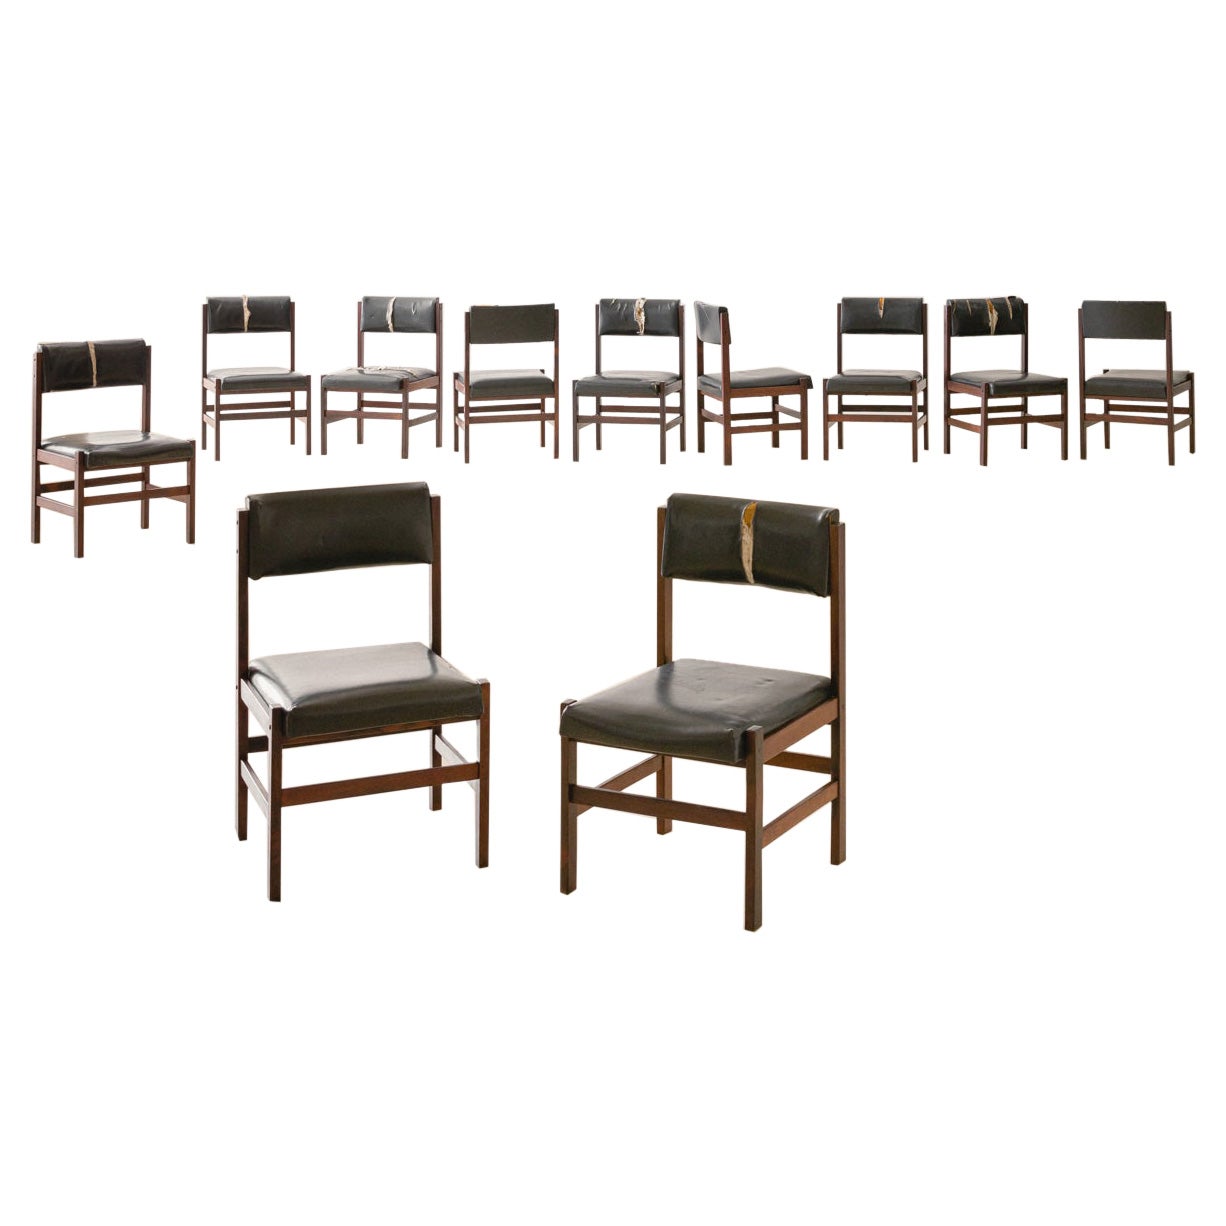 Set of 11 Rosewood Dining Chairs, Brazilian Midcentury Design, 1960s